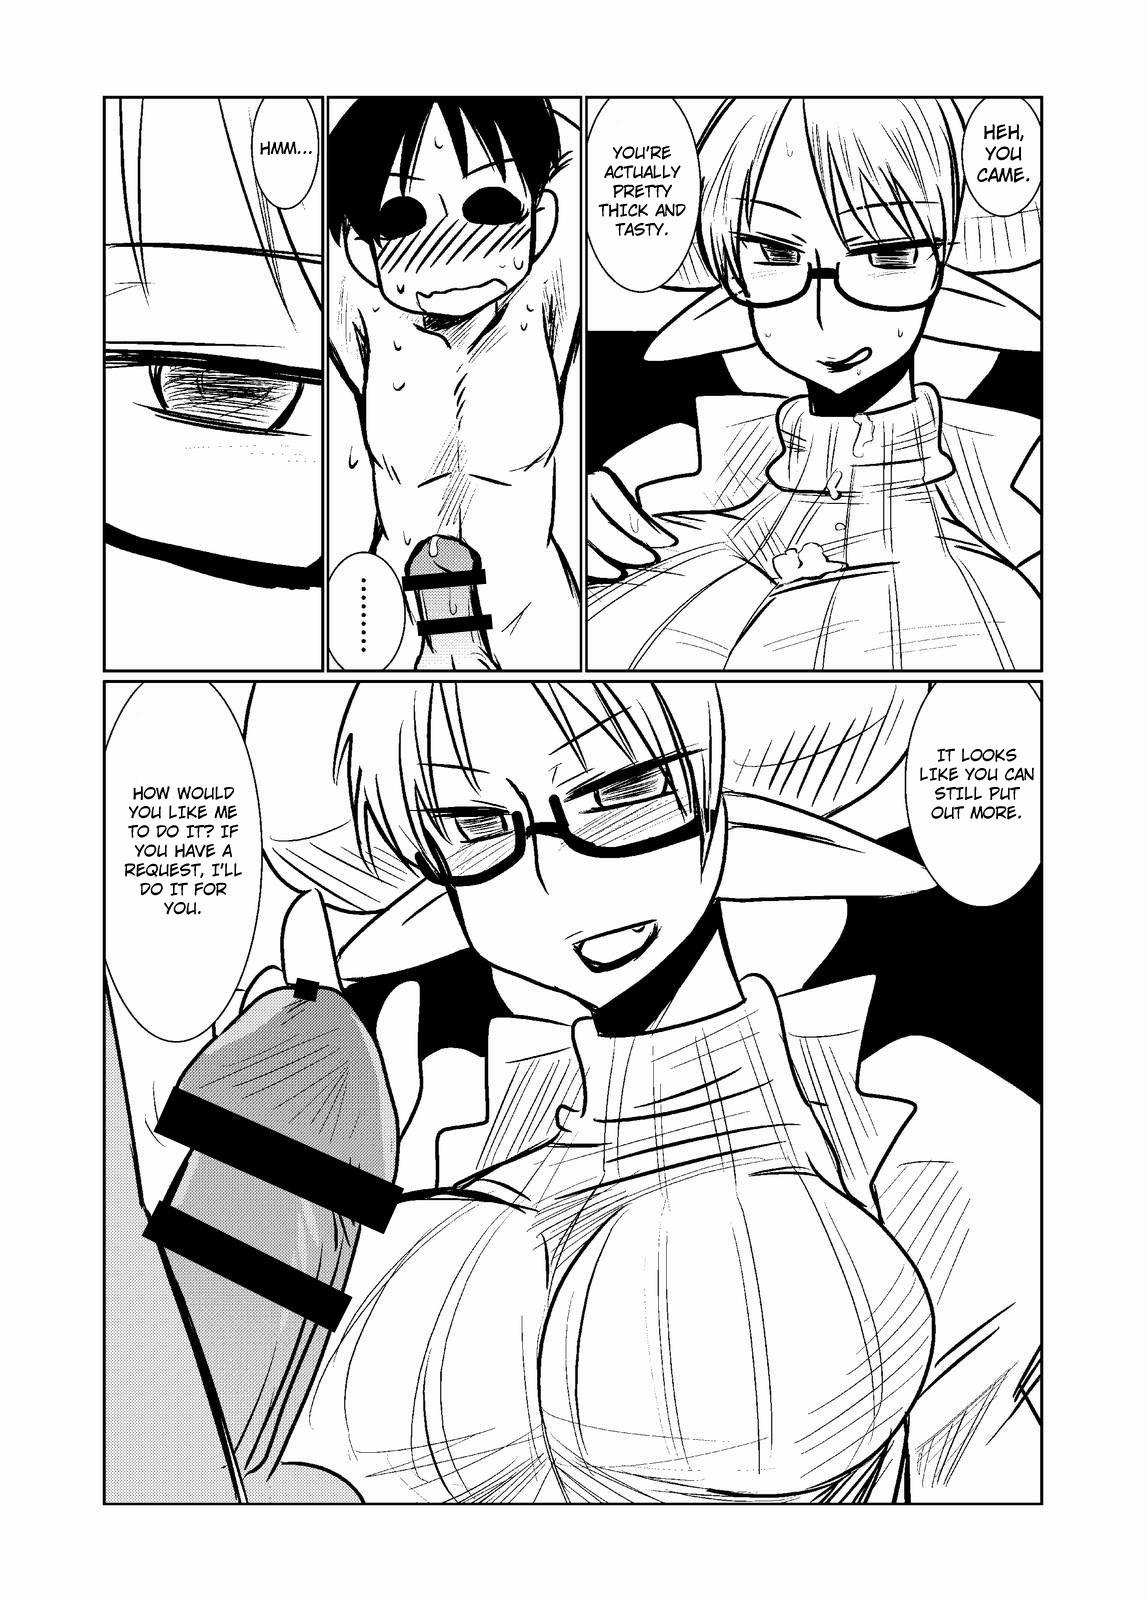 Tinder Succubus no Ningen Kenkyuu | Human Research by a Succubus Japanese - Page 7